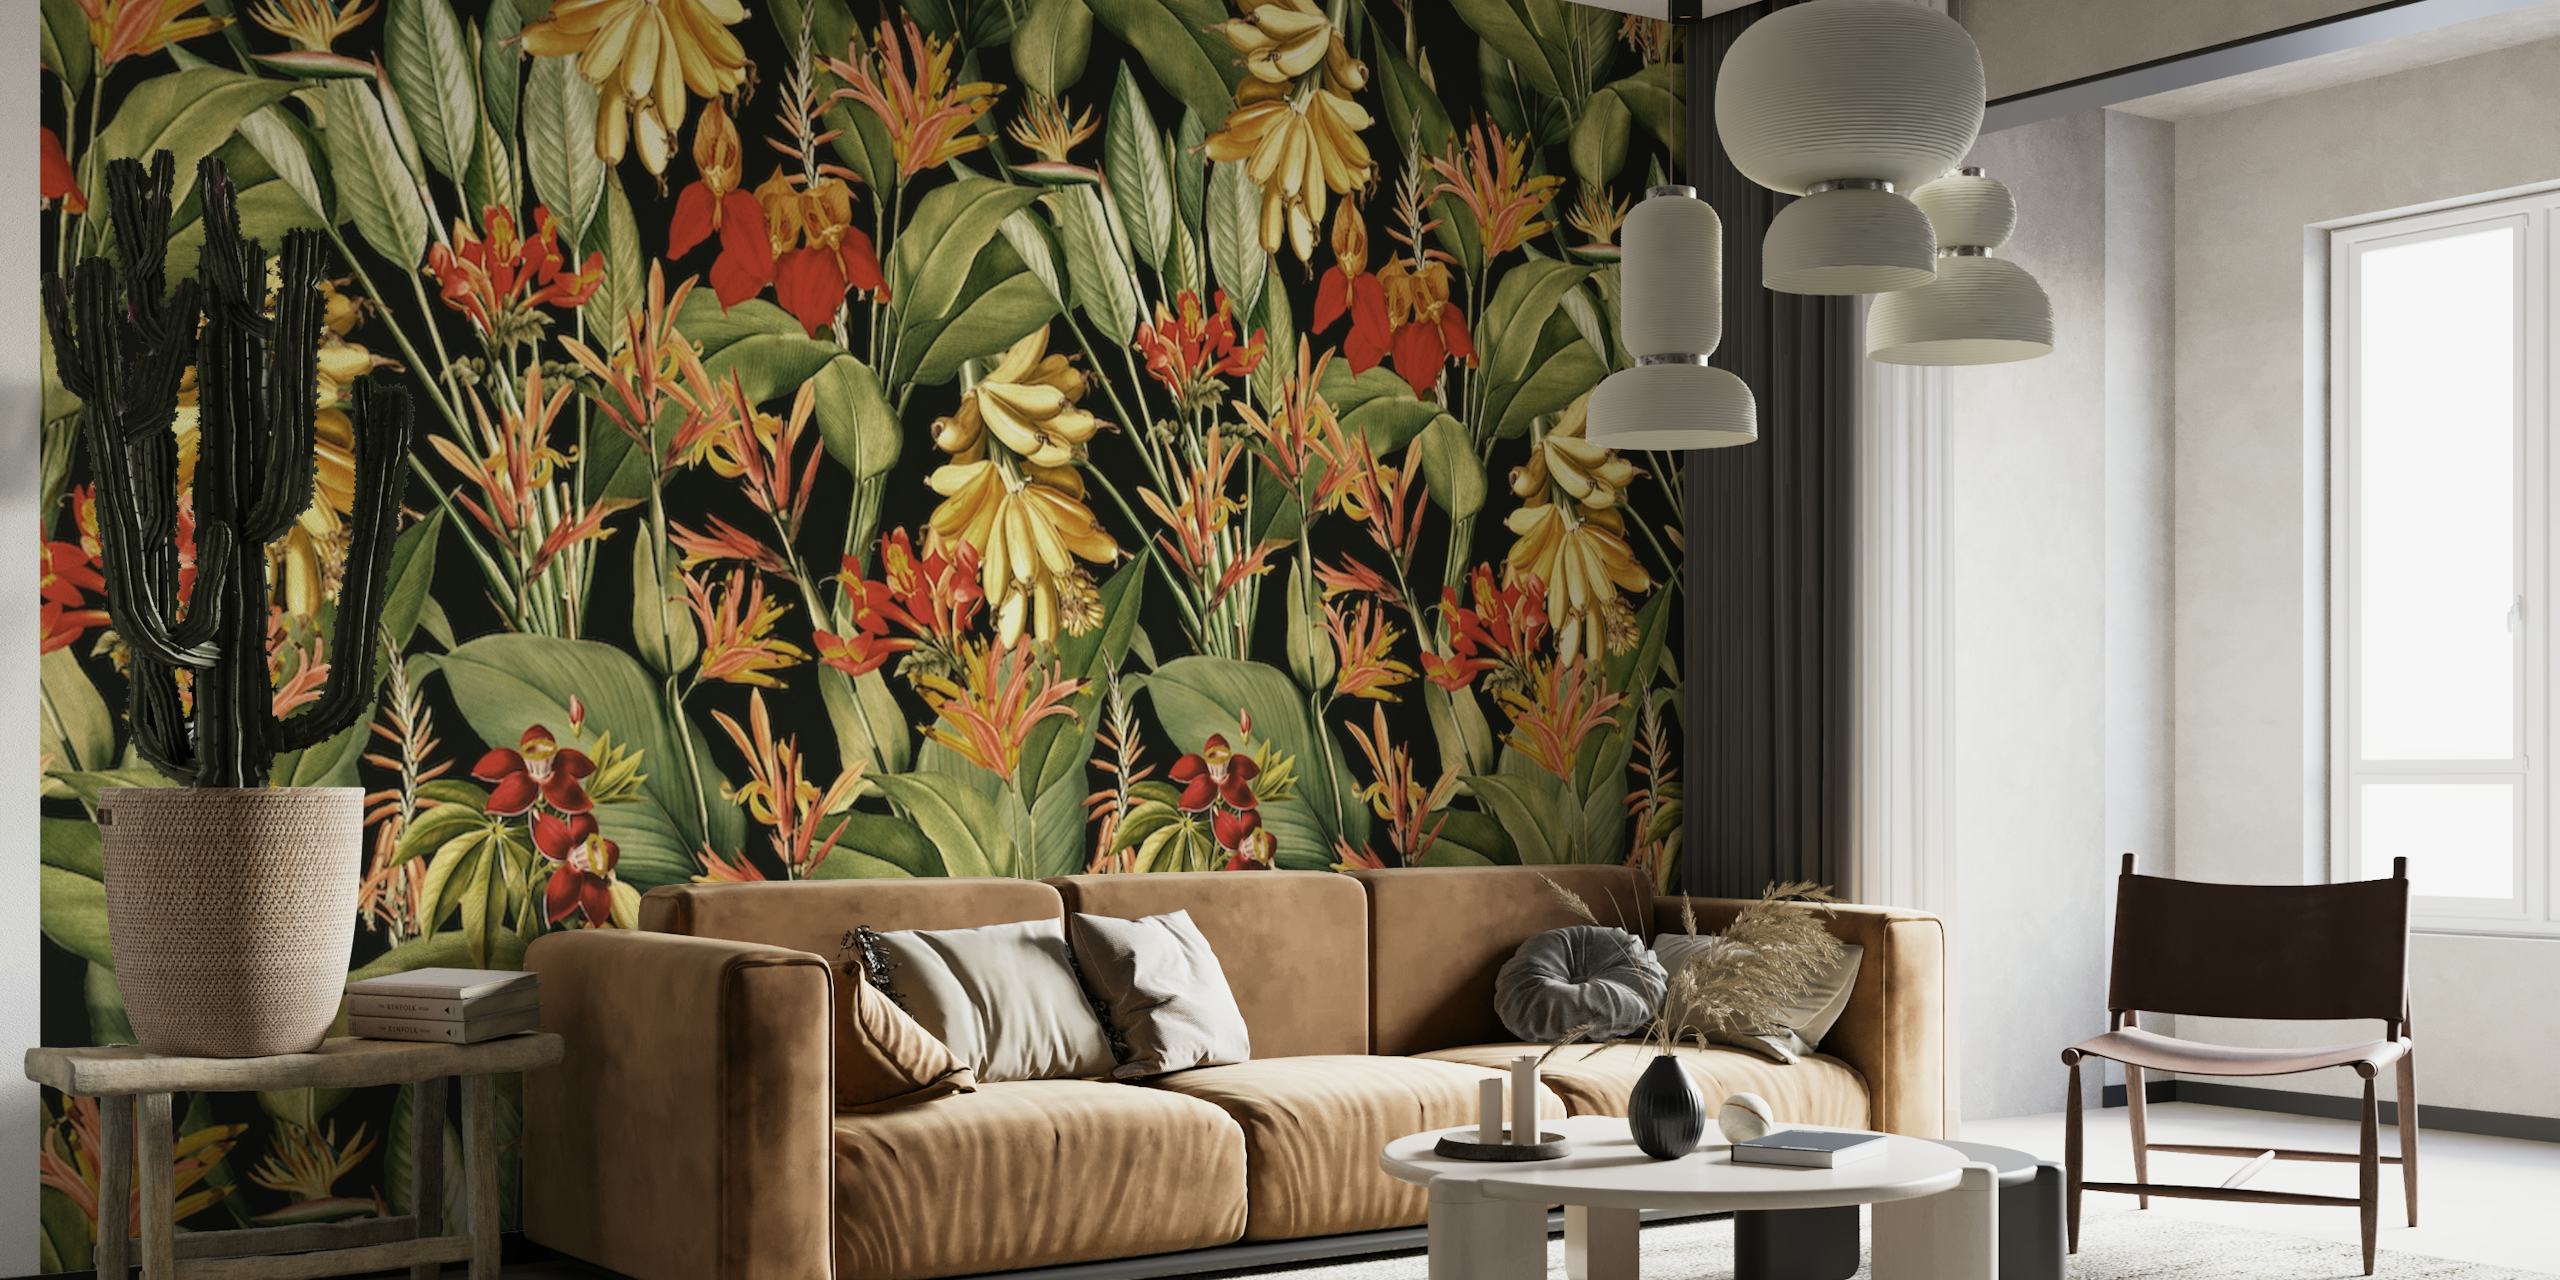 Tropical Night Jungle wall mural with lush green foliage and vibrant flowers